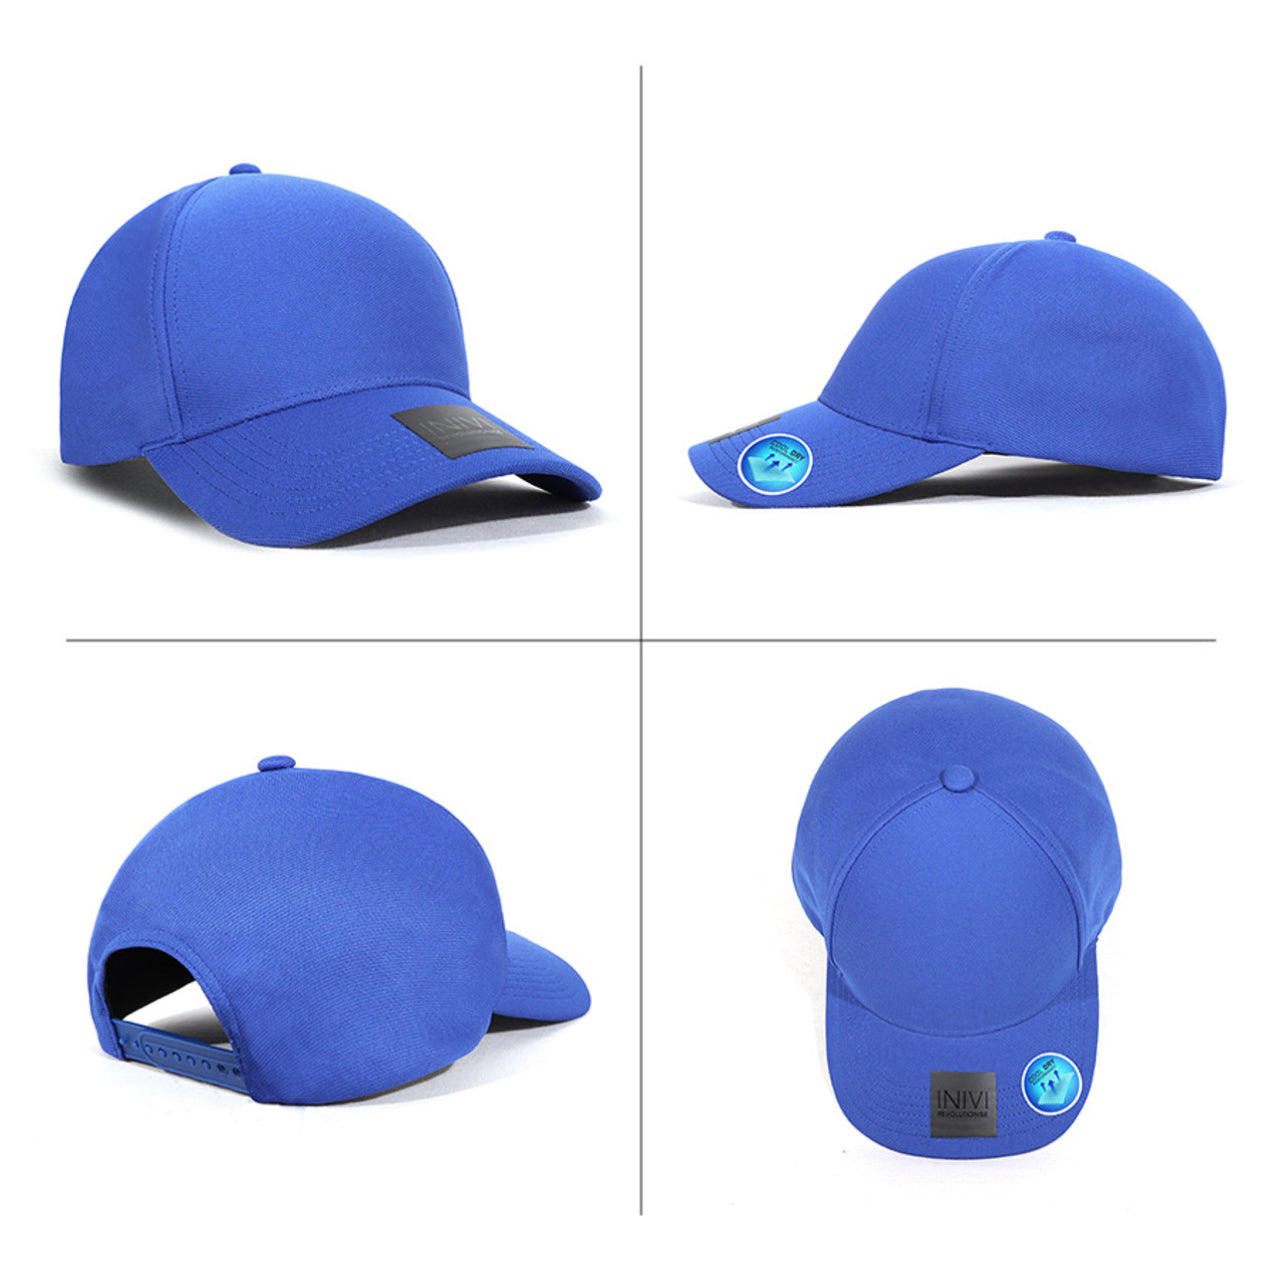 Work Caps and Wide Brim Hats - Tuff-As Workwear and Safety